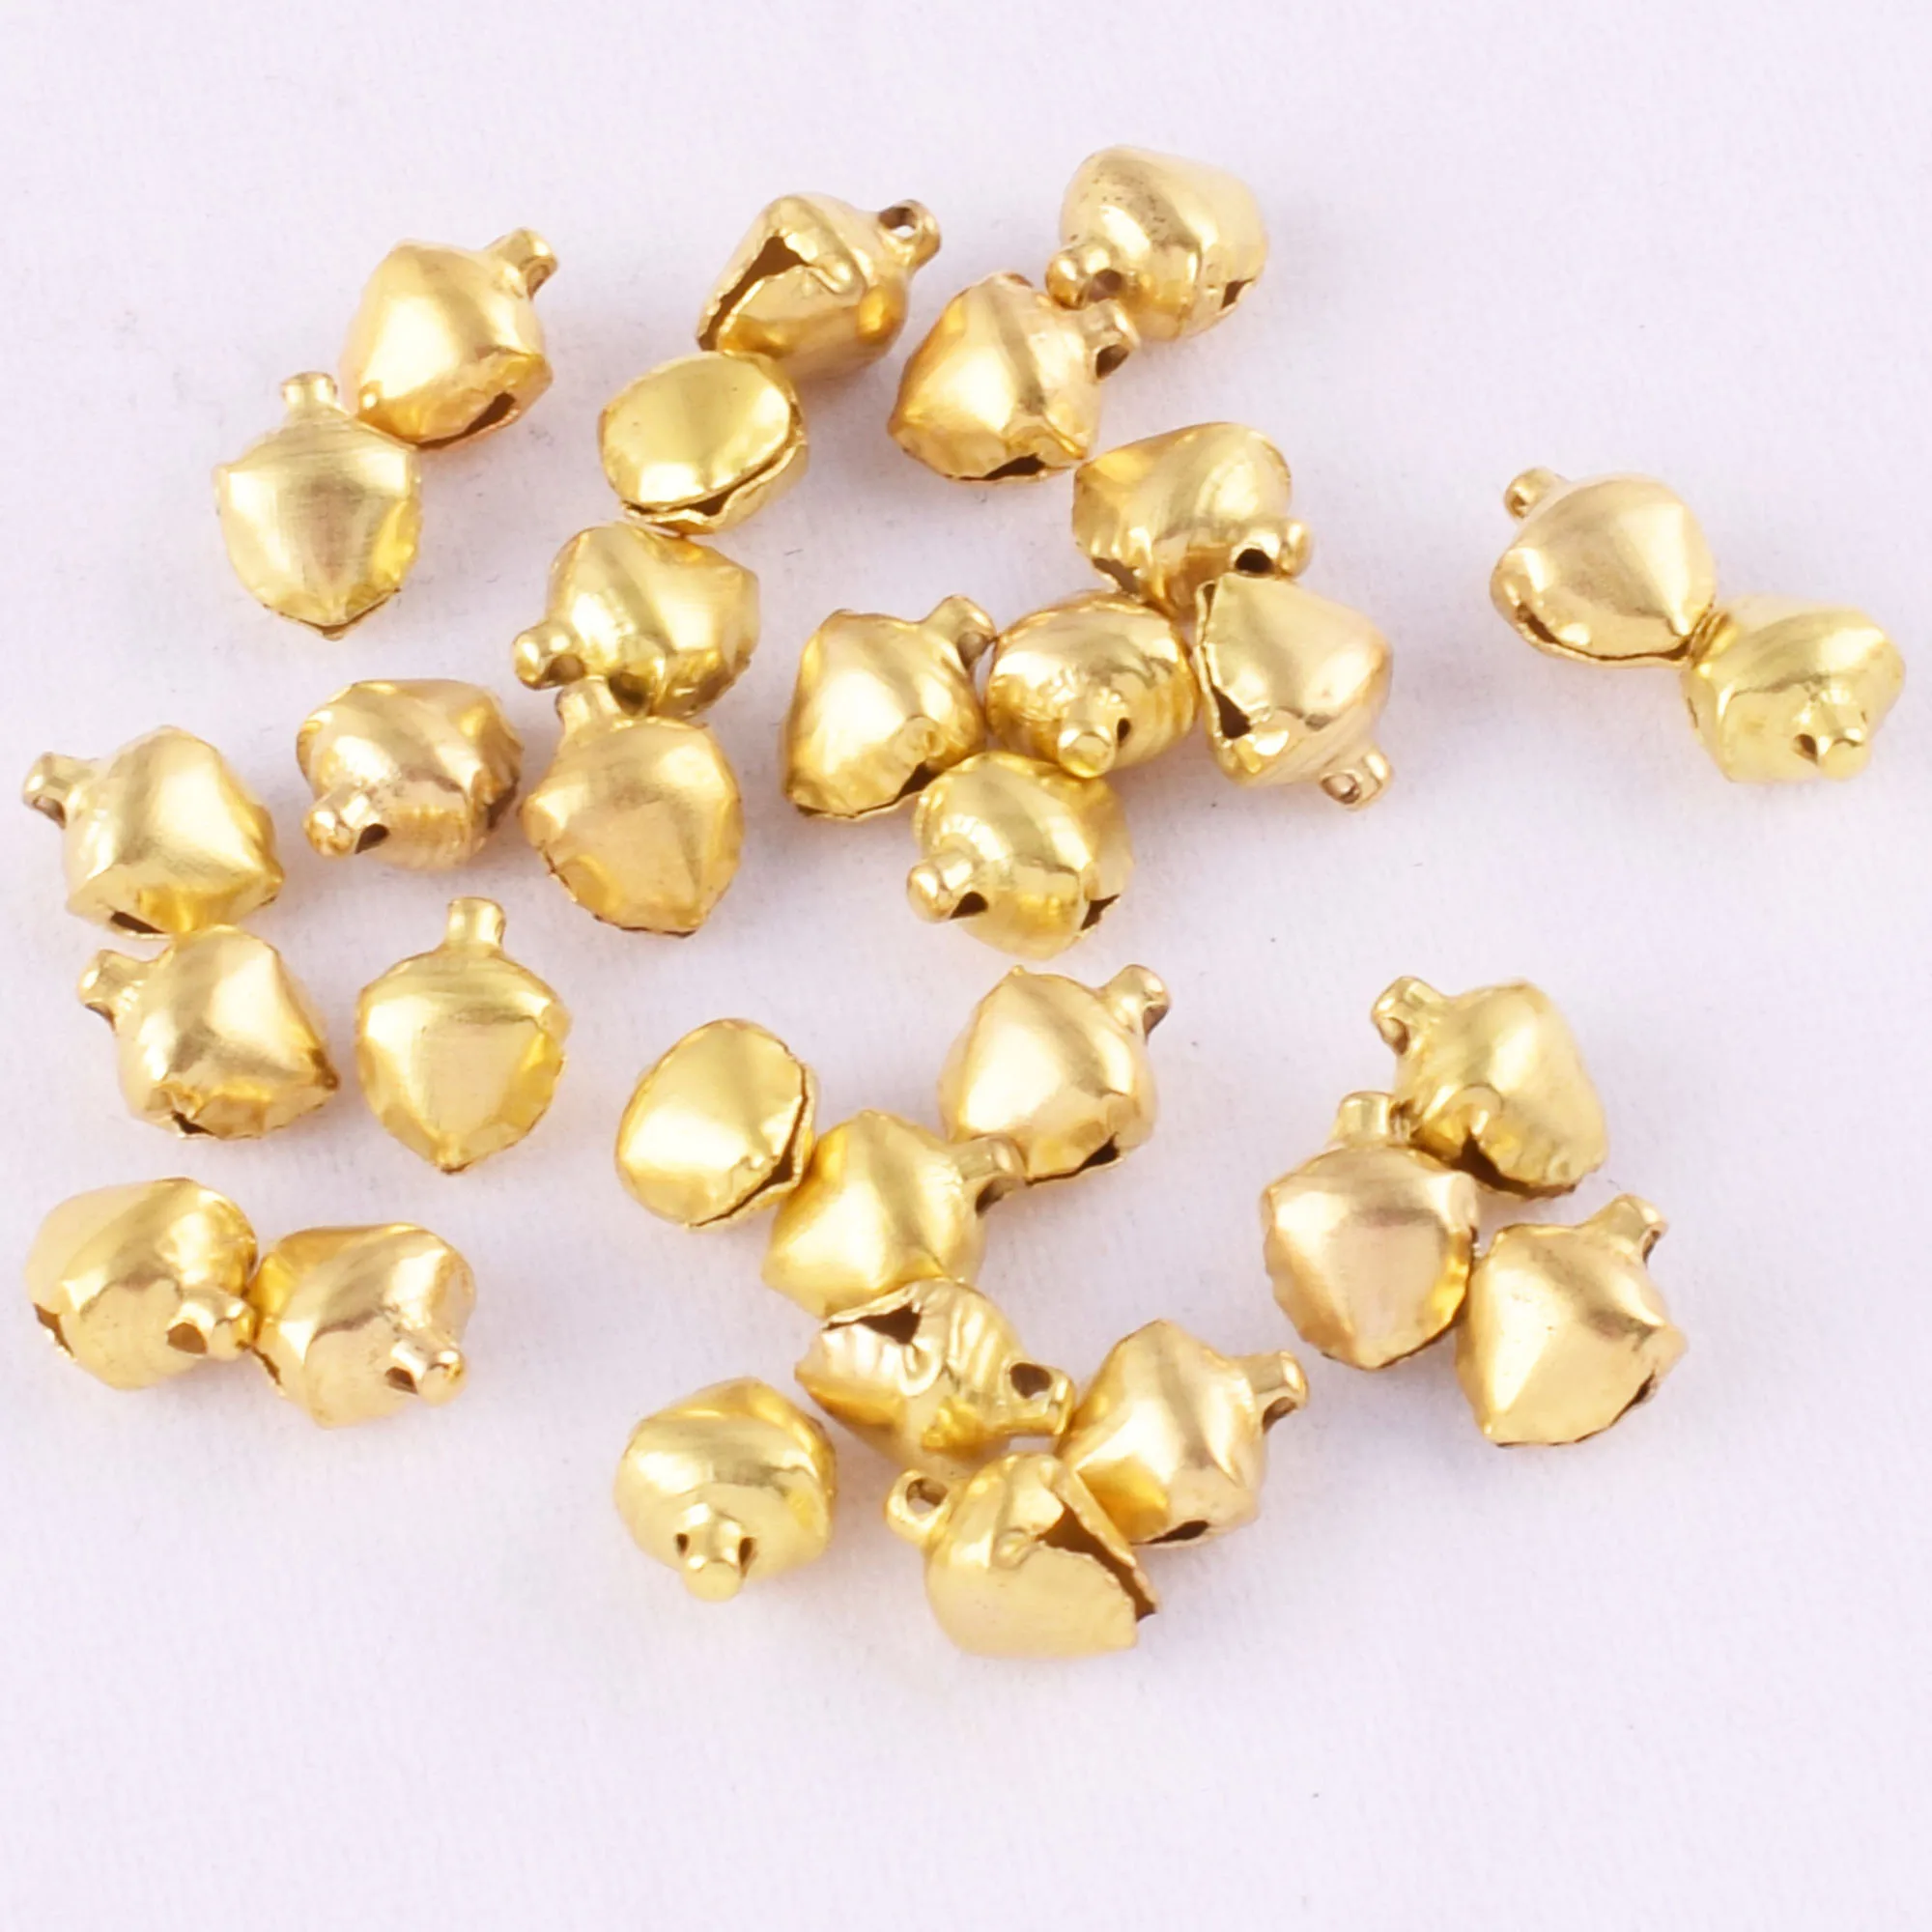 

50/100pcs Christmas Jingle Bells 12mm Gold Small Drop Charms Craft Bell Bulk Charming DIY Jewelry Bells for Festival Holiday